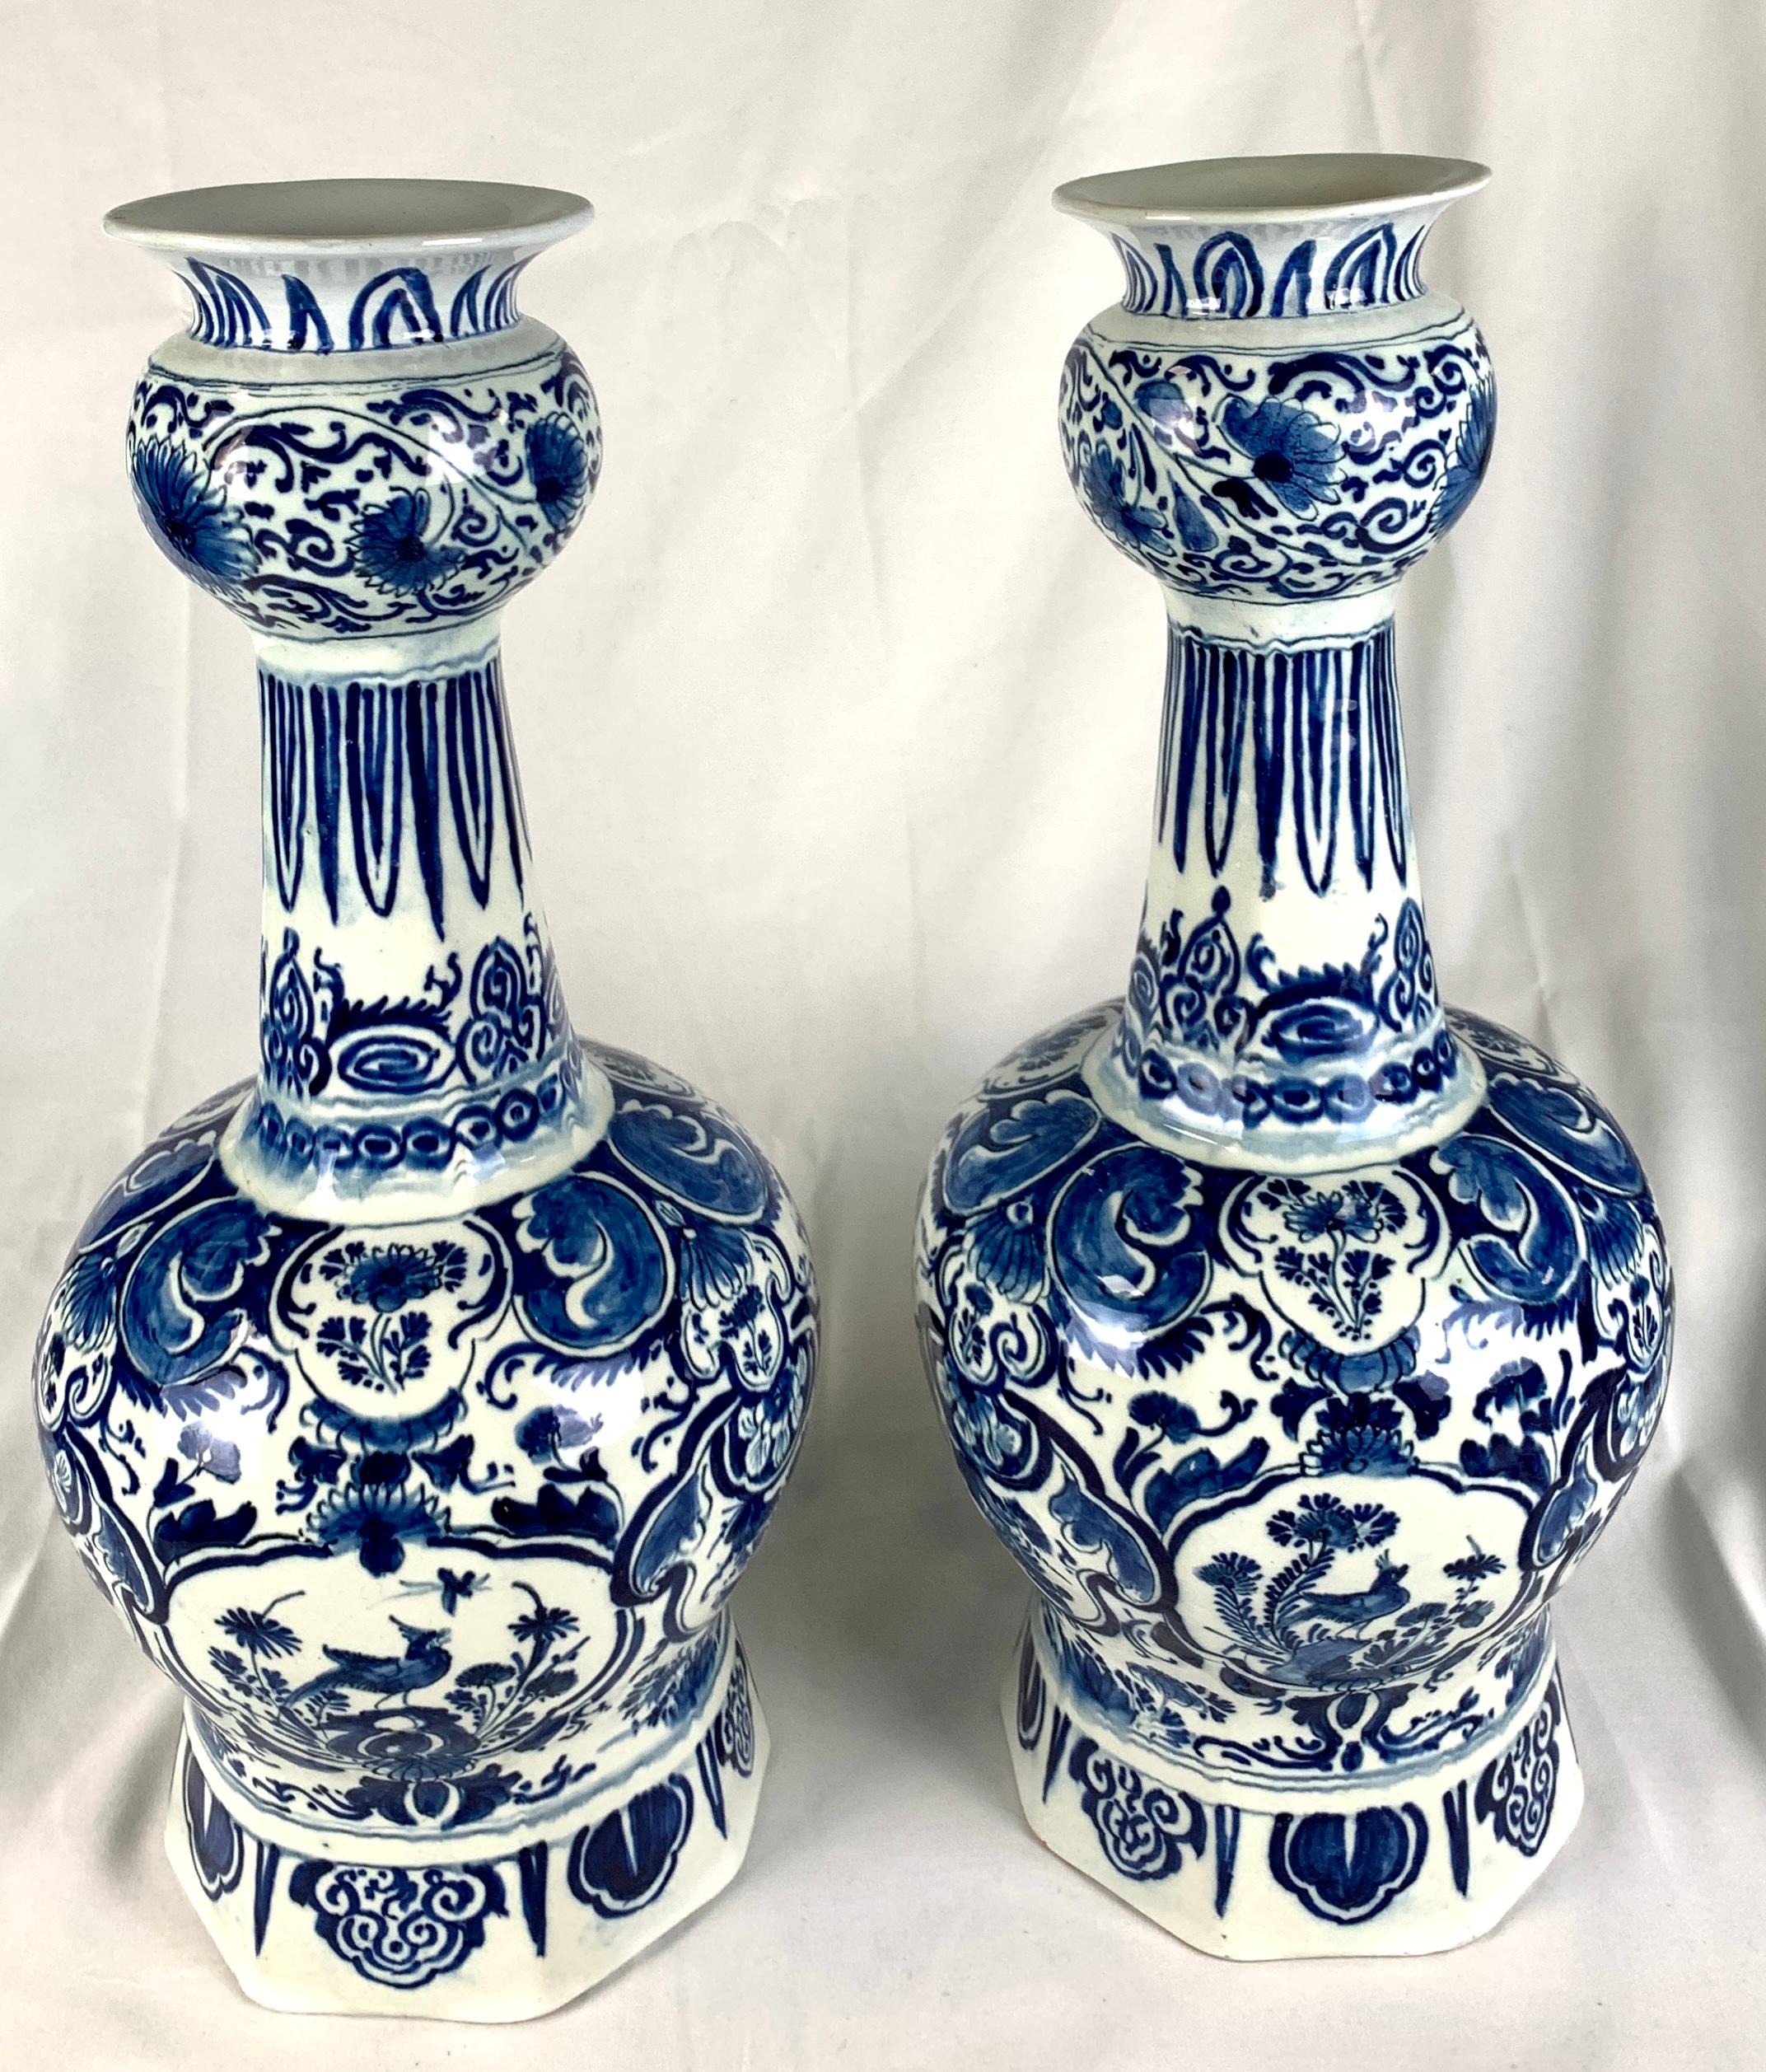 This large pair of blue and white Dutch Delft vases were hand painted in beautiful deep cobalt blue. They were made in The Netherlands in the 18th century, circa 1770.
The main body of each vase is fully decorated with six cartouches, three showing